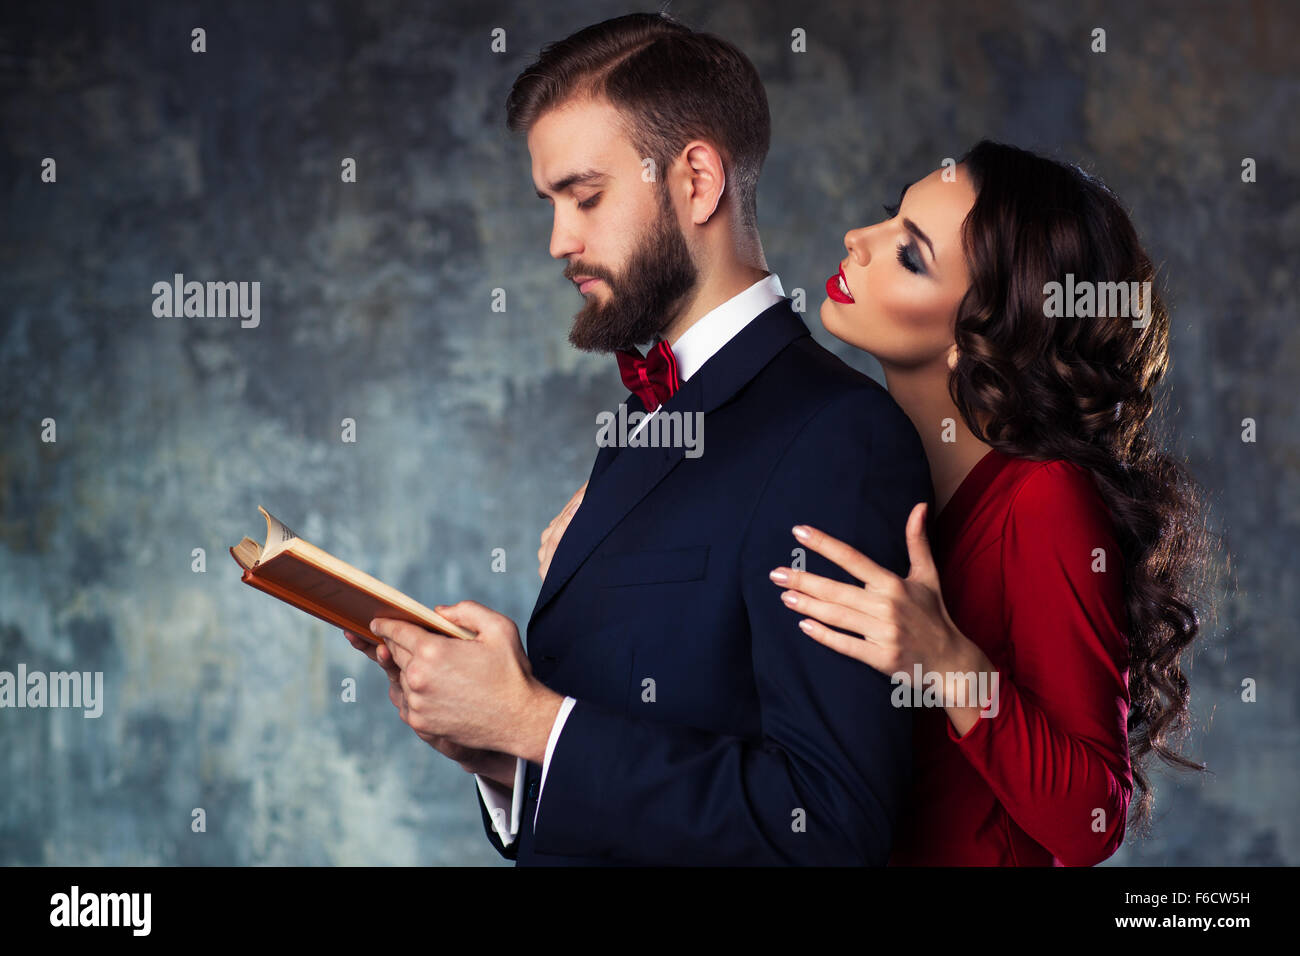 Young elegant couple in evening dress portrait. Man reading book and woman trying to attract and embrace him. Stock Photo